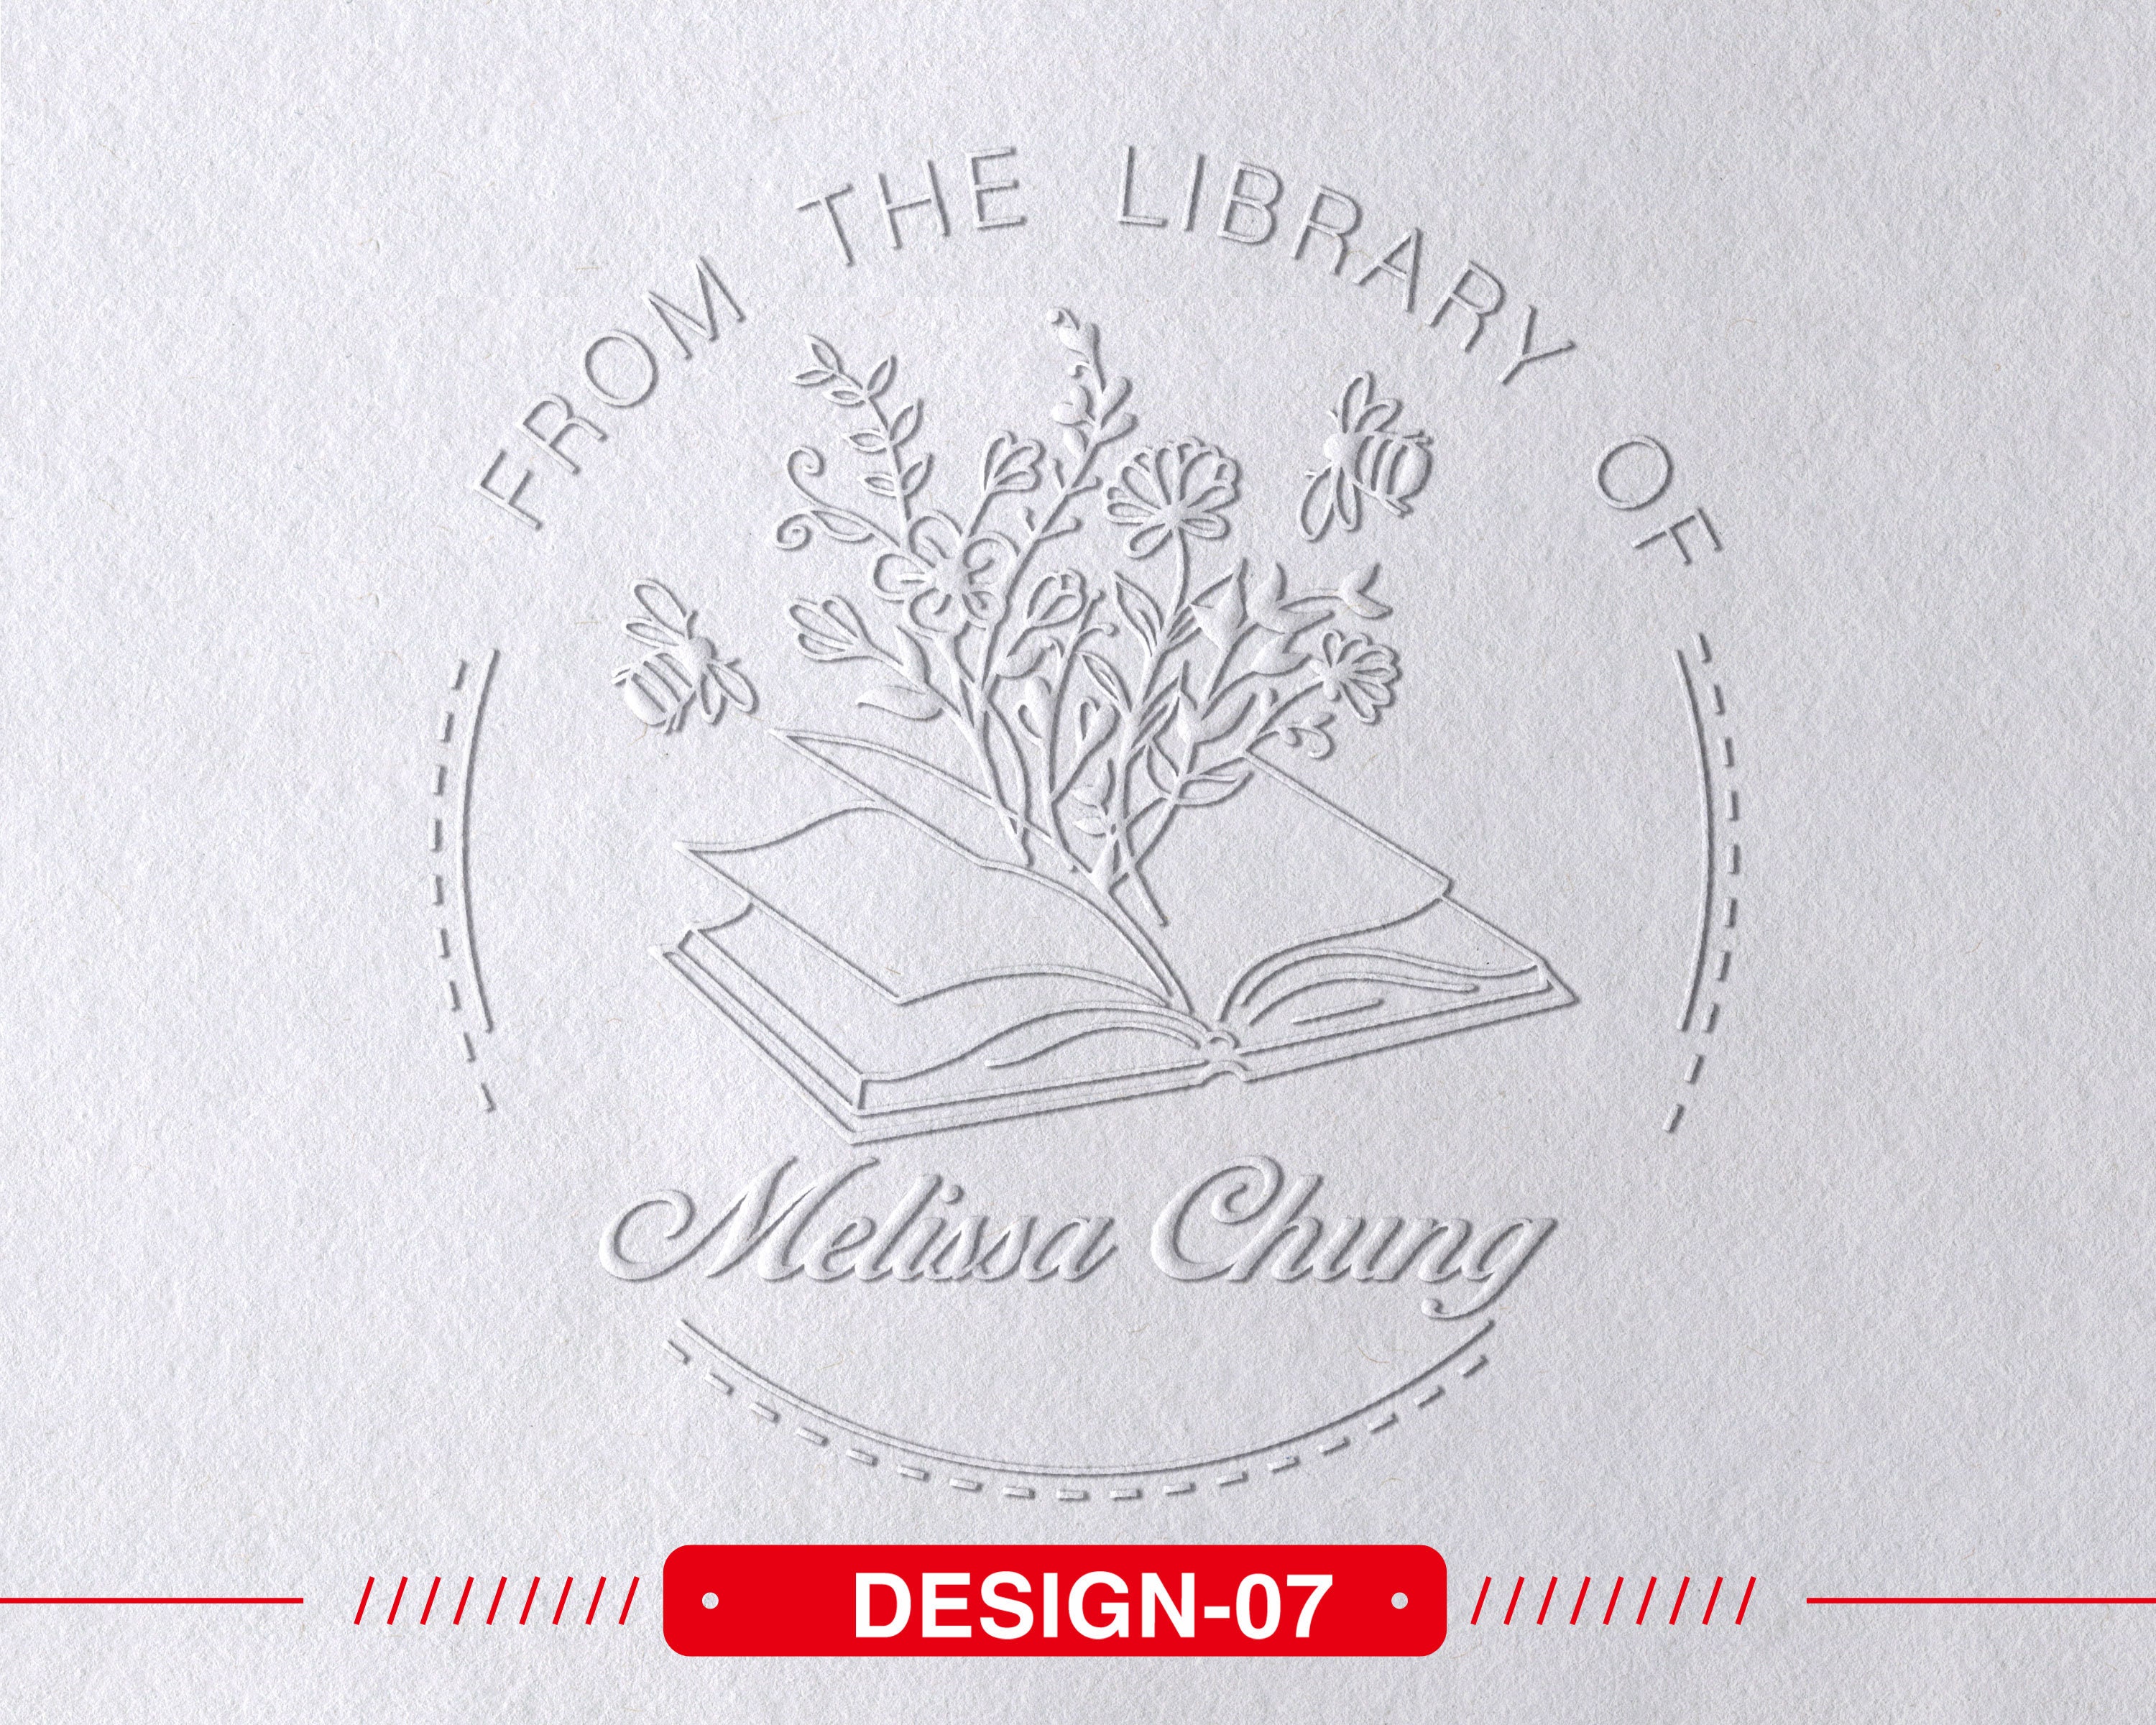 BEST SELLING Personal Name Library Stamp, Custom Personalized Gift, Teacher  Gift, Round Logo Stamp, Library Book Stamp, School Stamp 